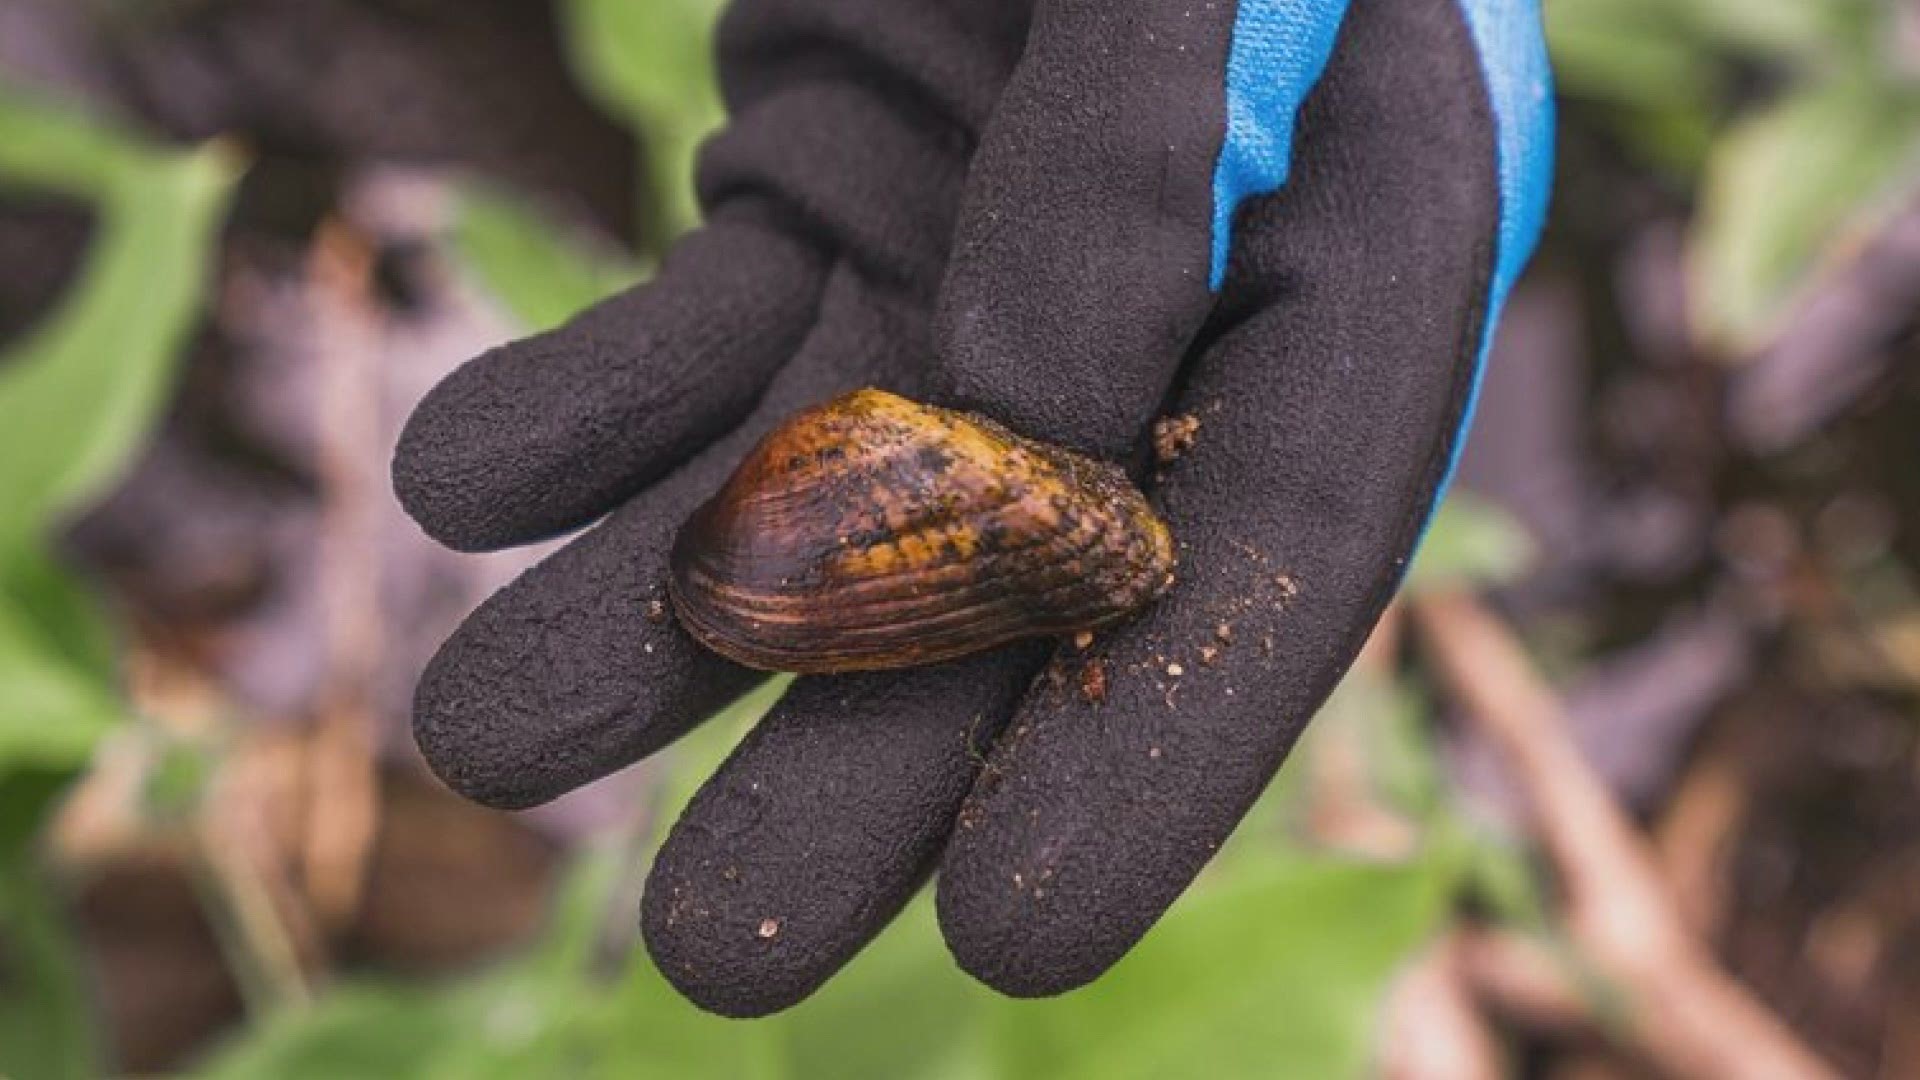 Hundreds of snuffbox mussels were found in a creek in Kalamazoo, a species that is on the endangered list.